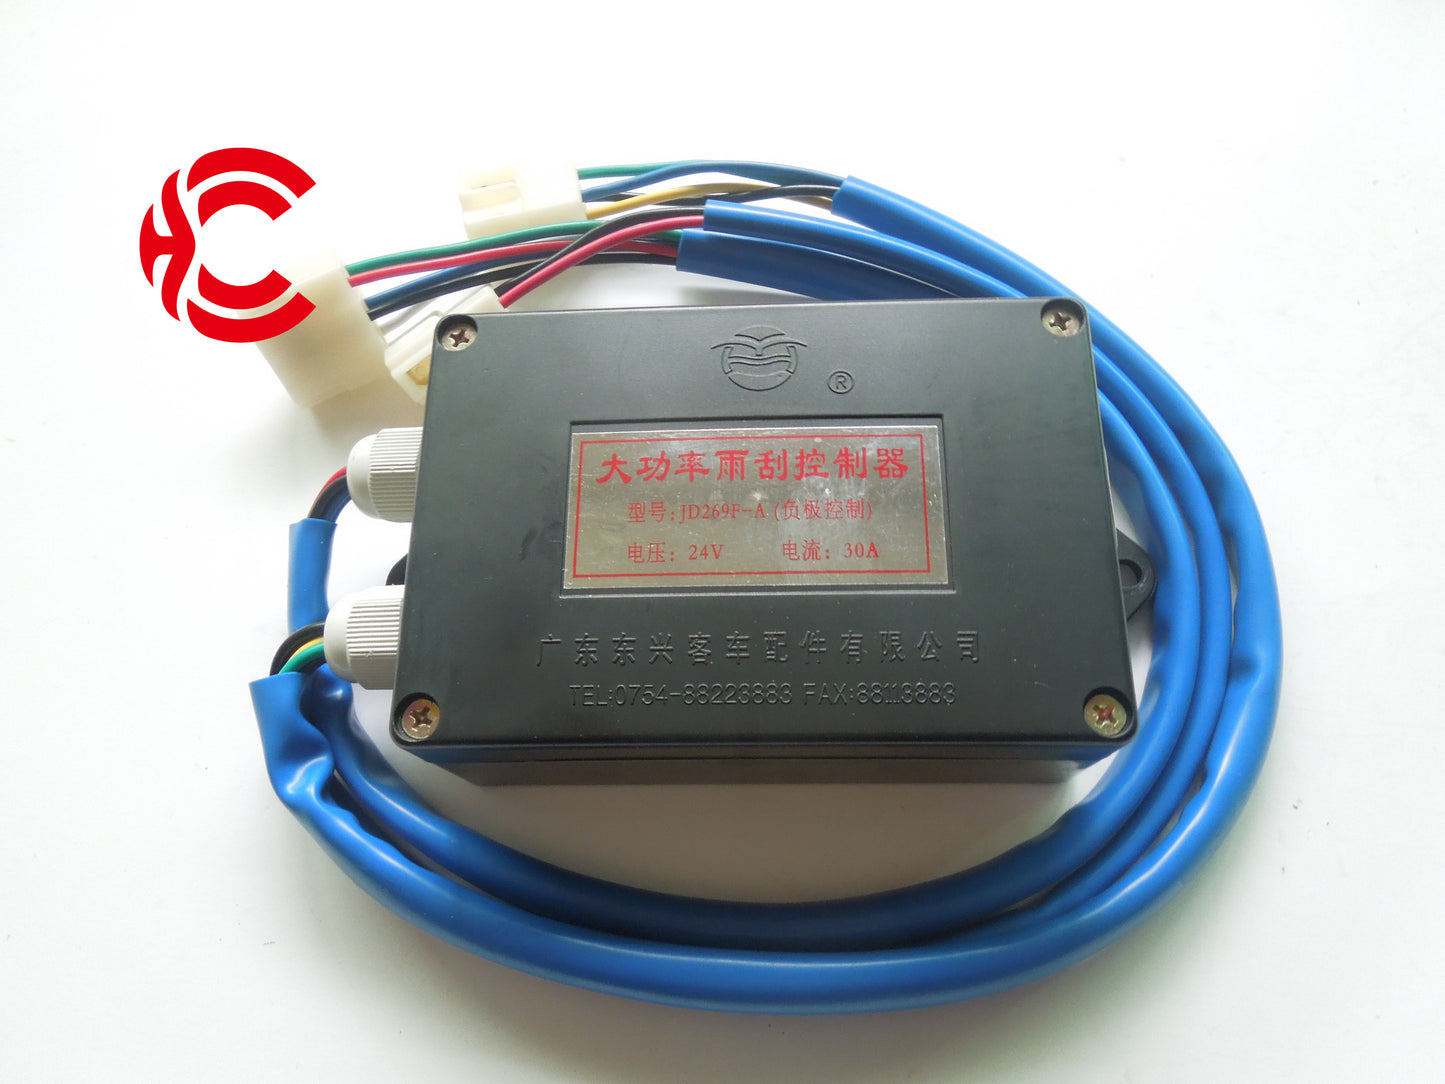 OEM: JD269F-A Negative ControlMaterial: ABS Color: black Origin: Made in ChinaWeight: 150gPacking List: 1* Wiper Intermittent Relay More ServiceWe can provide OEM Manufacturing serviceWe can Be your one-step solution for Auto PartsWe can provide technical scheme for you Feel Free to Contact Us, We will get back to you as soon as possible.